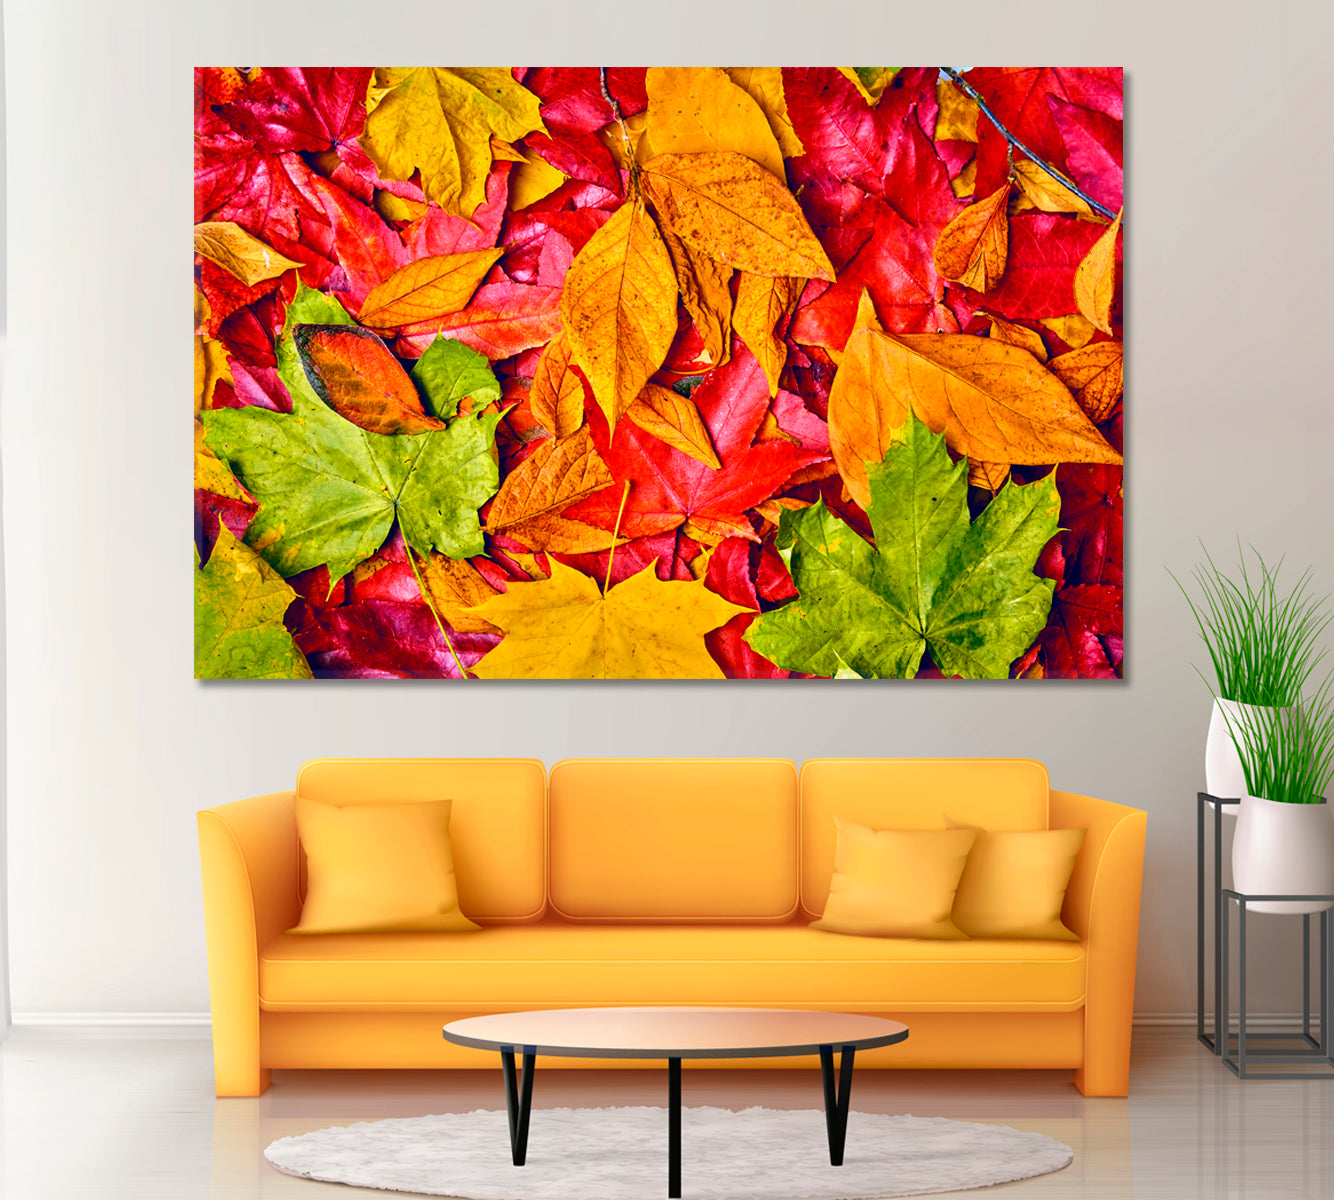 Autumn Leaves Canvas Print ArtLexy 1 Panel 24"x16" inches 